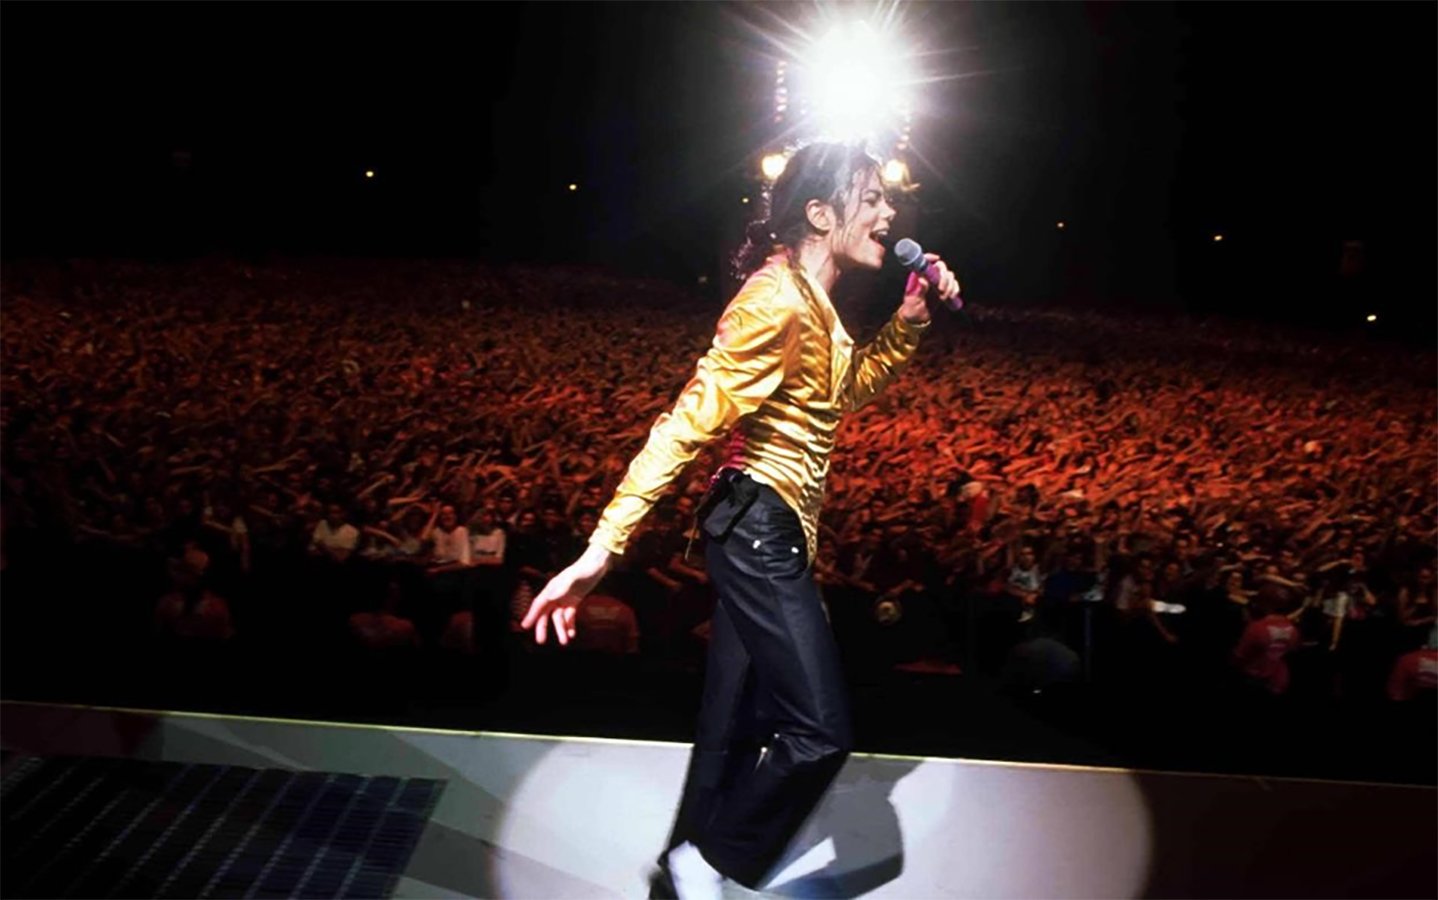 Live In Bucharest: The Dangerous Tour Broke Records For Highest Ratings In Cable History